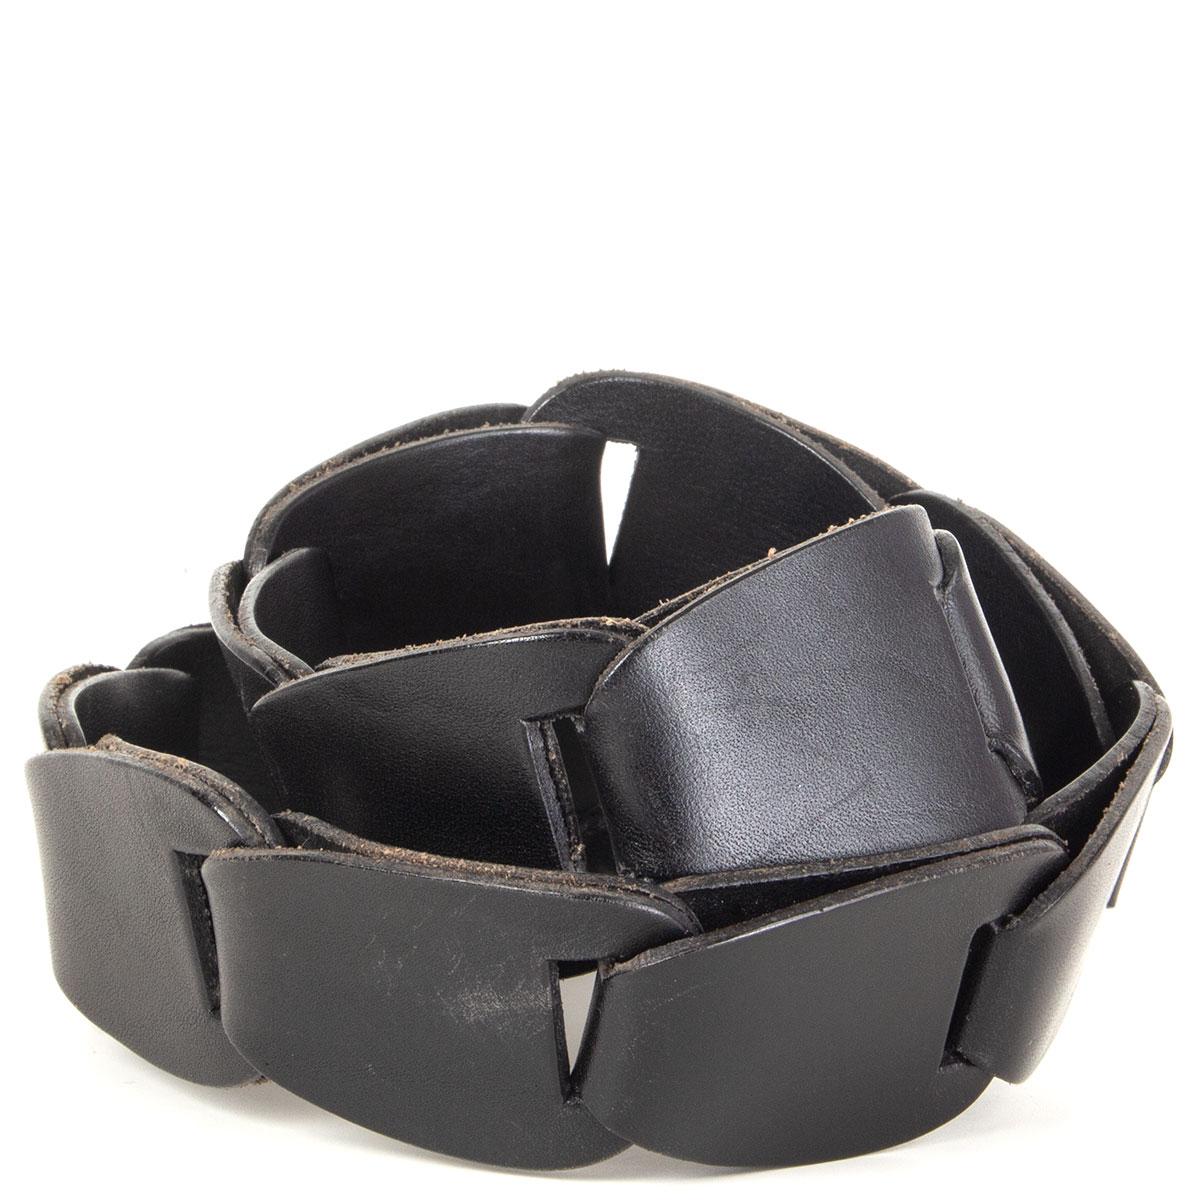 Gucci belt made of black intertwined leather elements and wooden buckle part. Has been worn and is in excellent condition.

Tag Size 80/32
Width 4cm (1.6in)
Fits 72cm (28.1in) to 76cm (29.6in)
Length 78cm (30.4in)
Buckle Size Height 4cm